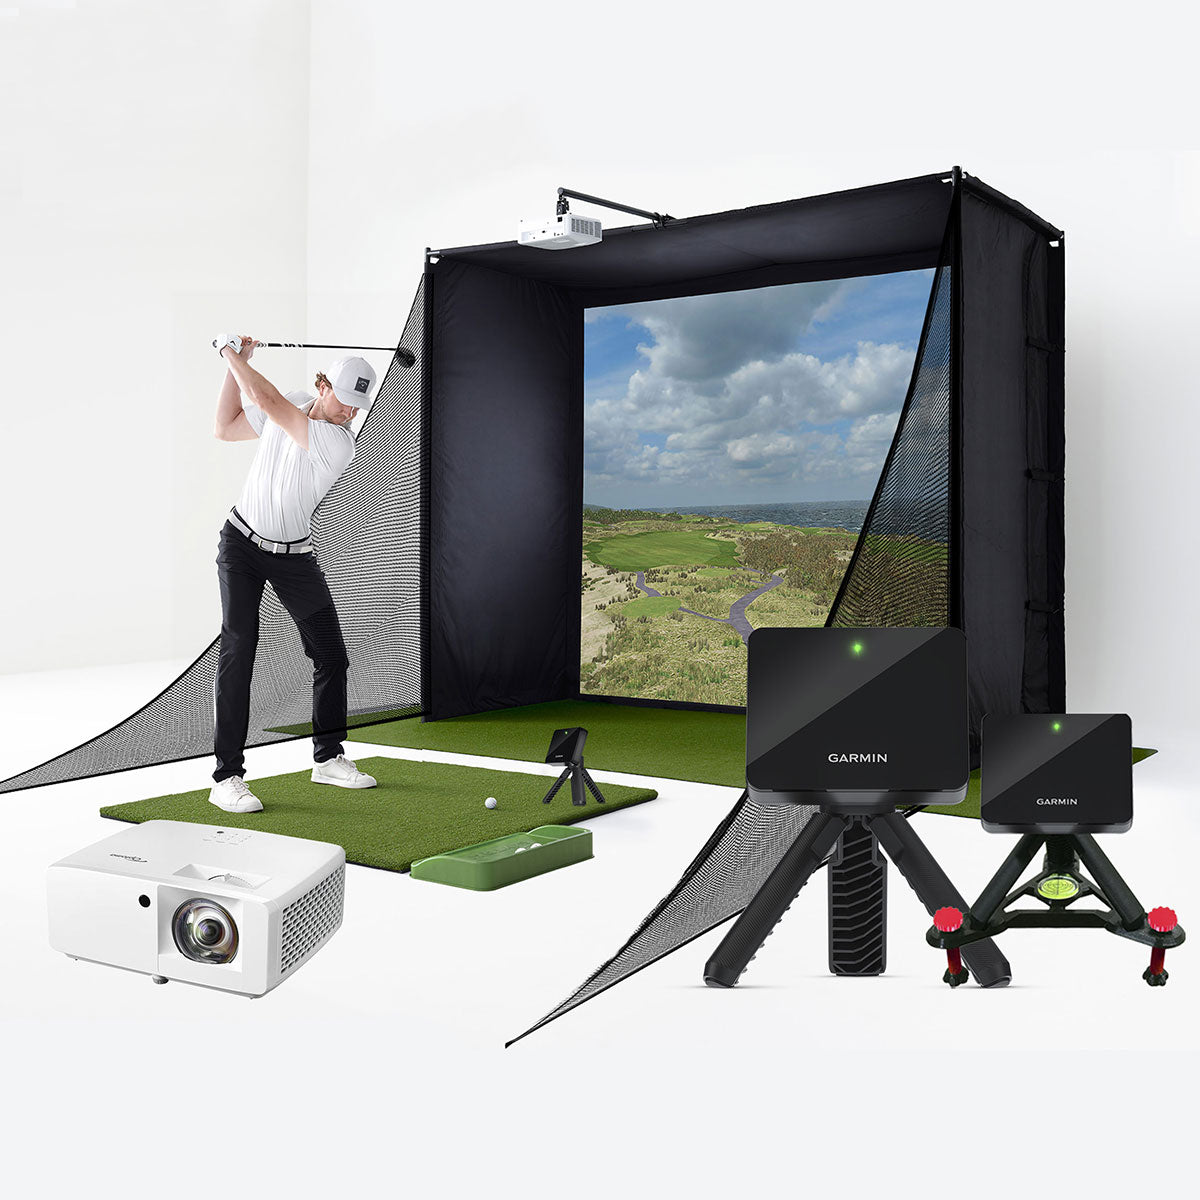 Garmin Approach R10 Golf Simulator Studio Package | PlayBetter SimStudio™  with Impact Screen, Enclosure, Side Barriers, Hitting/Putting Mats & 